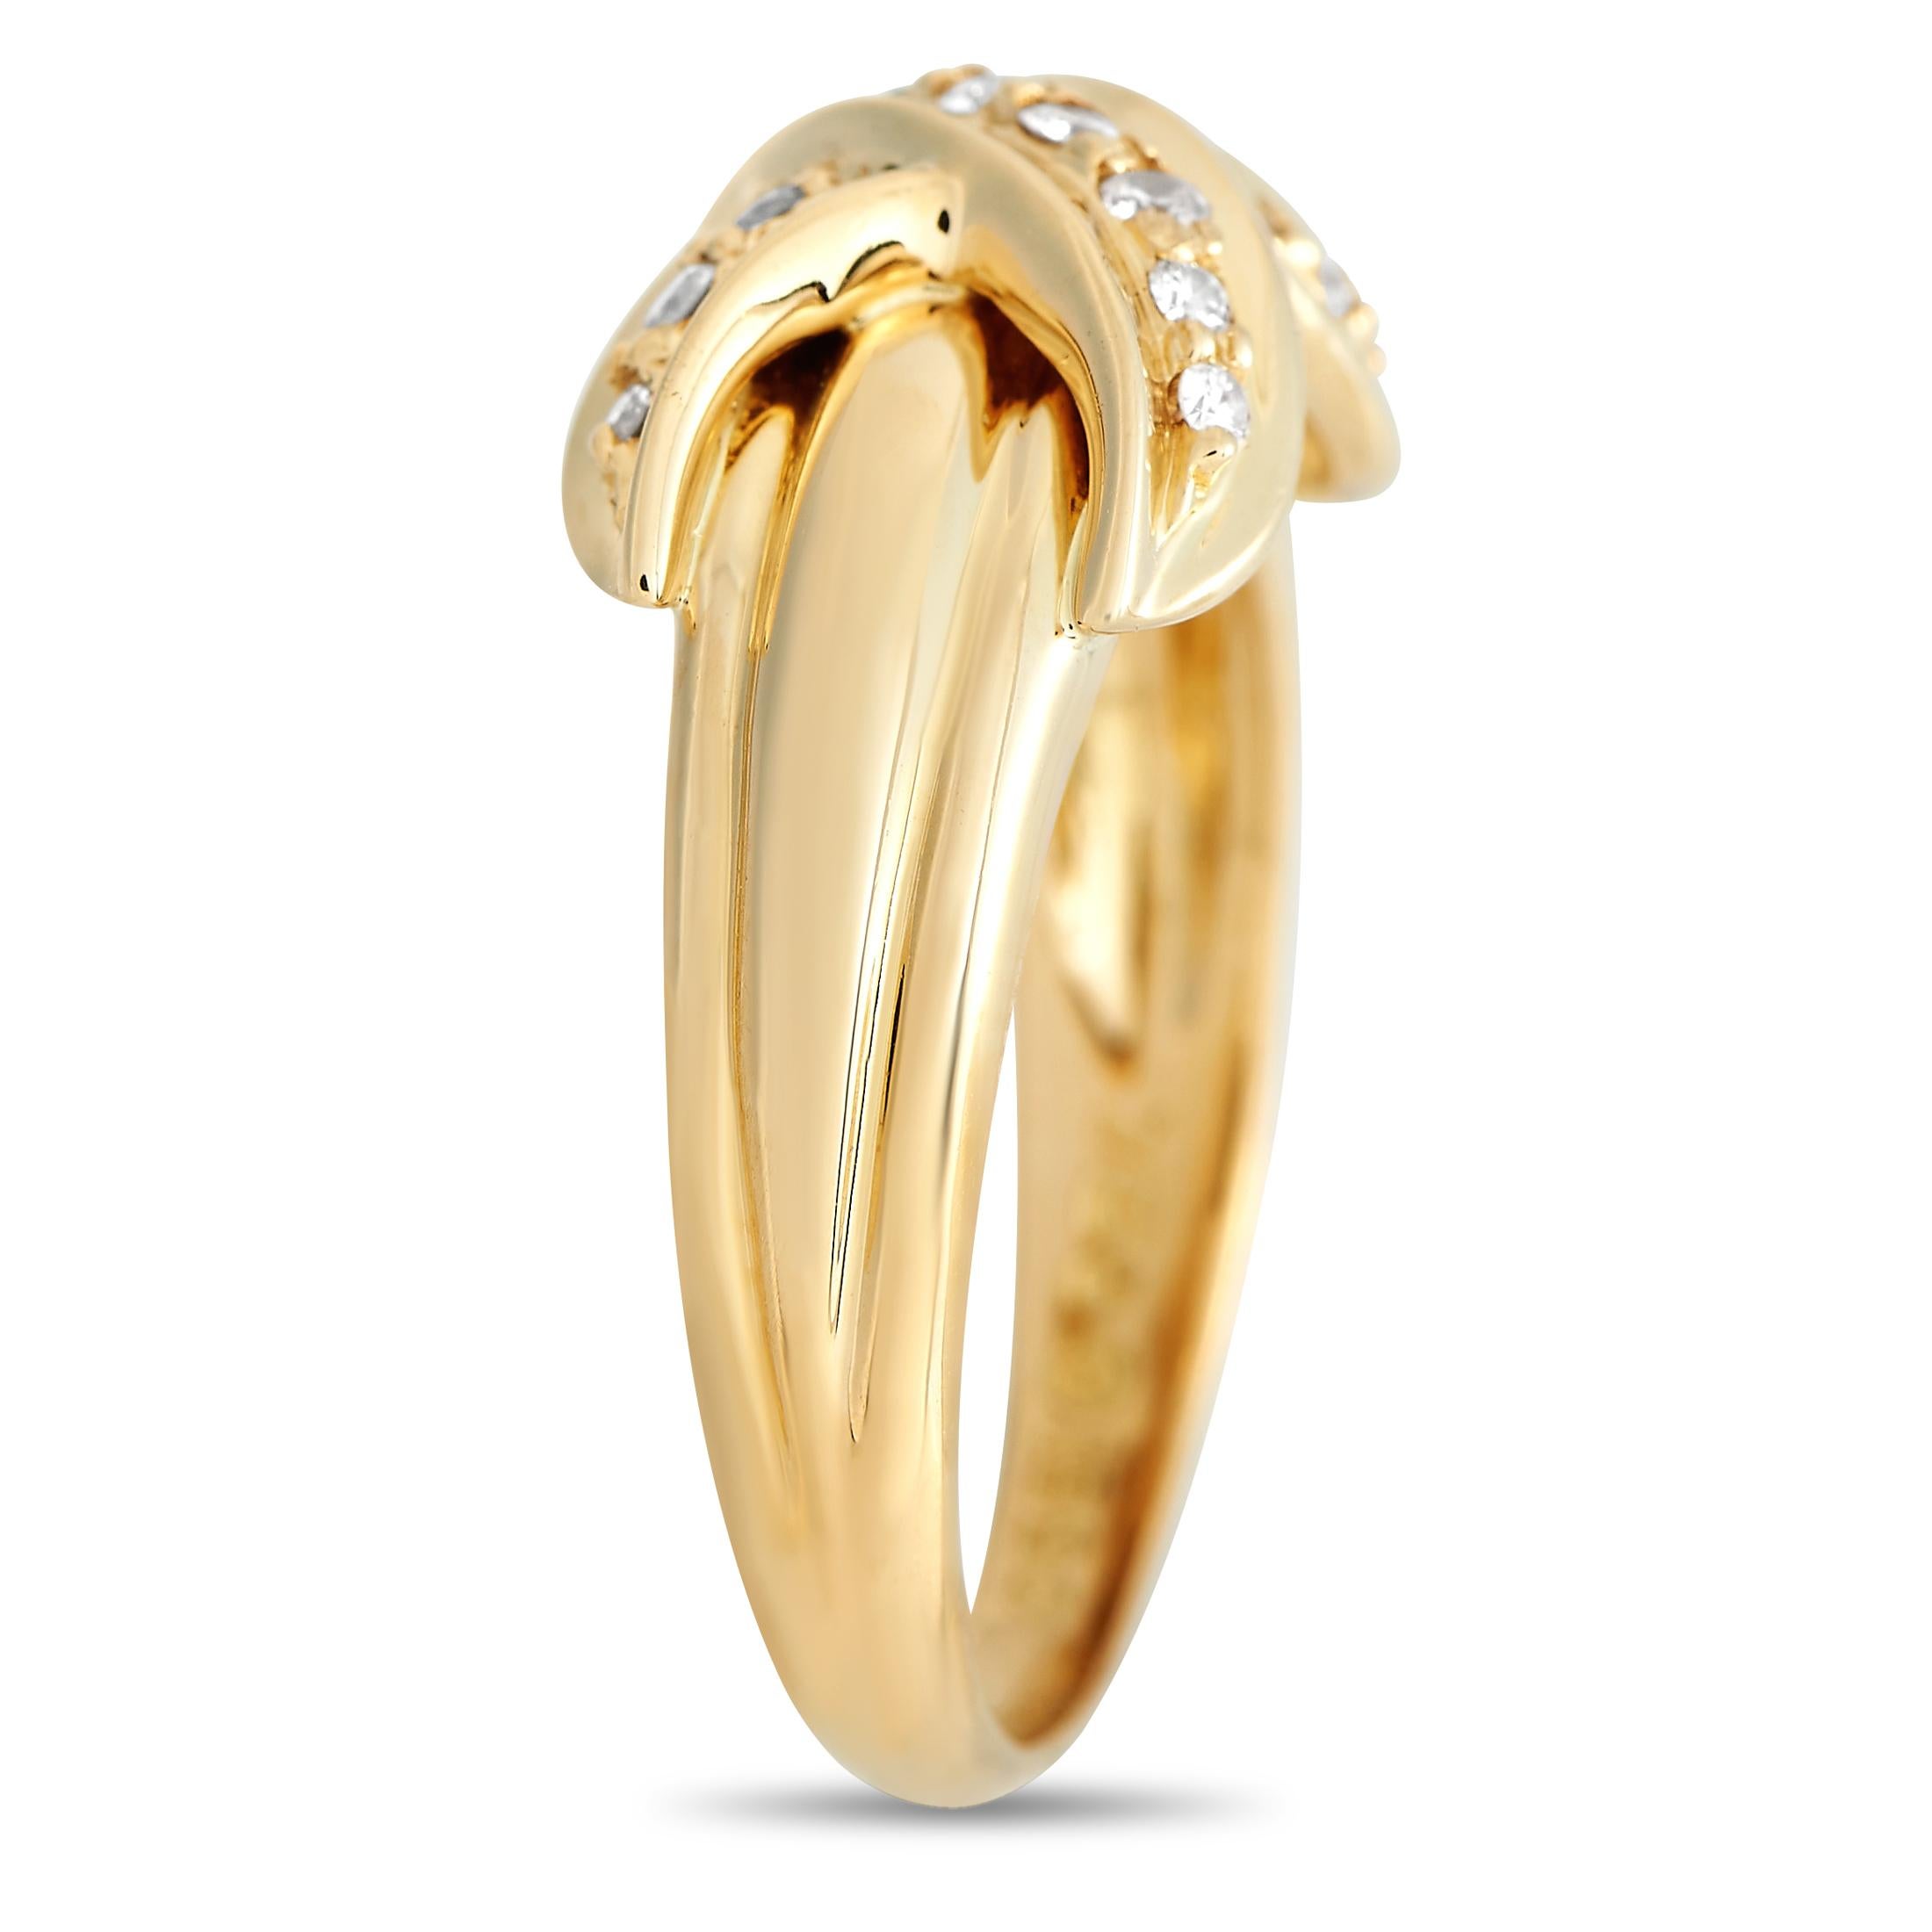 A timeless Tiffany & Co. ring that you can seamlessly integrate into any outfit. The yellow gold band tapers at the bottom and features a fluted detail on top. A diamond-encrusted X motif embraces the ridged part of the shank and wraps the ring with